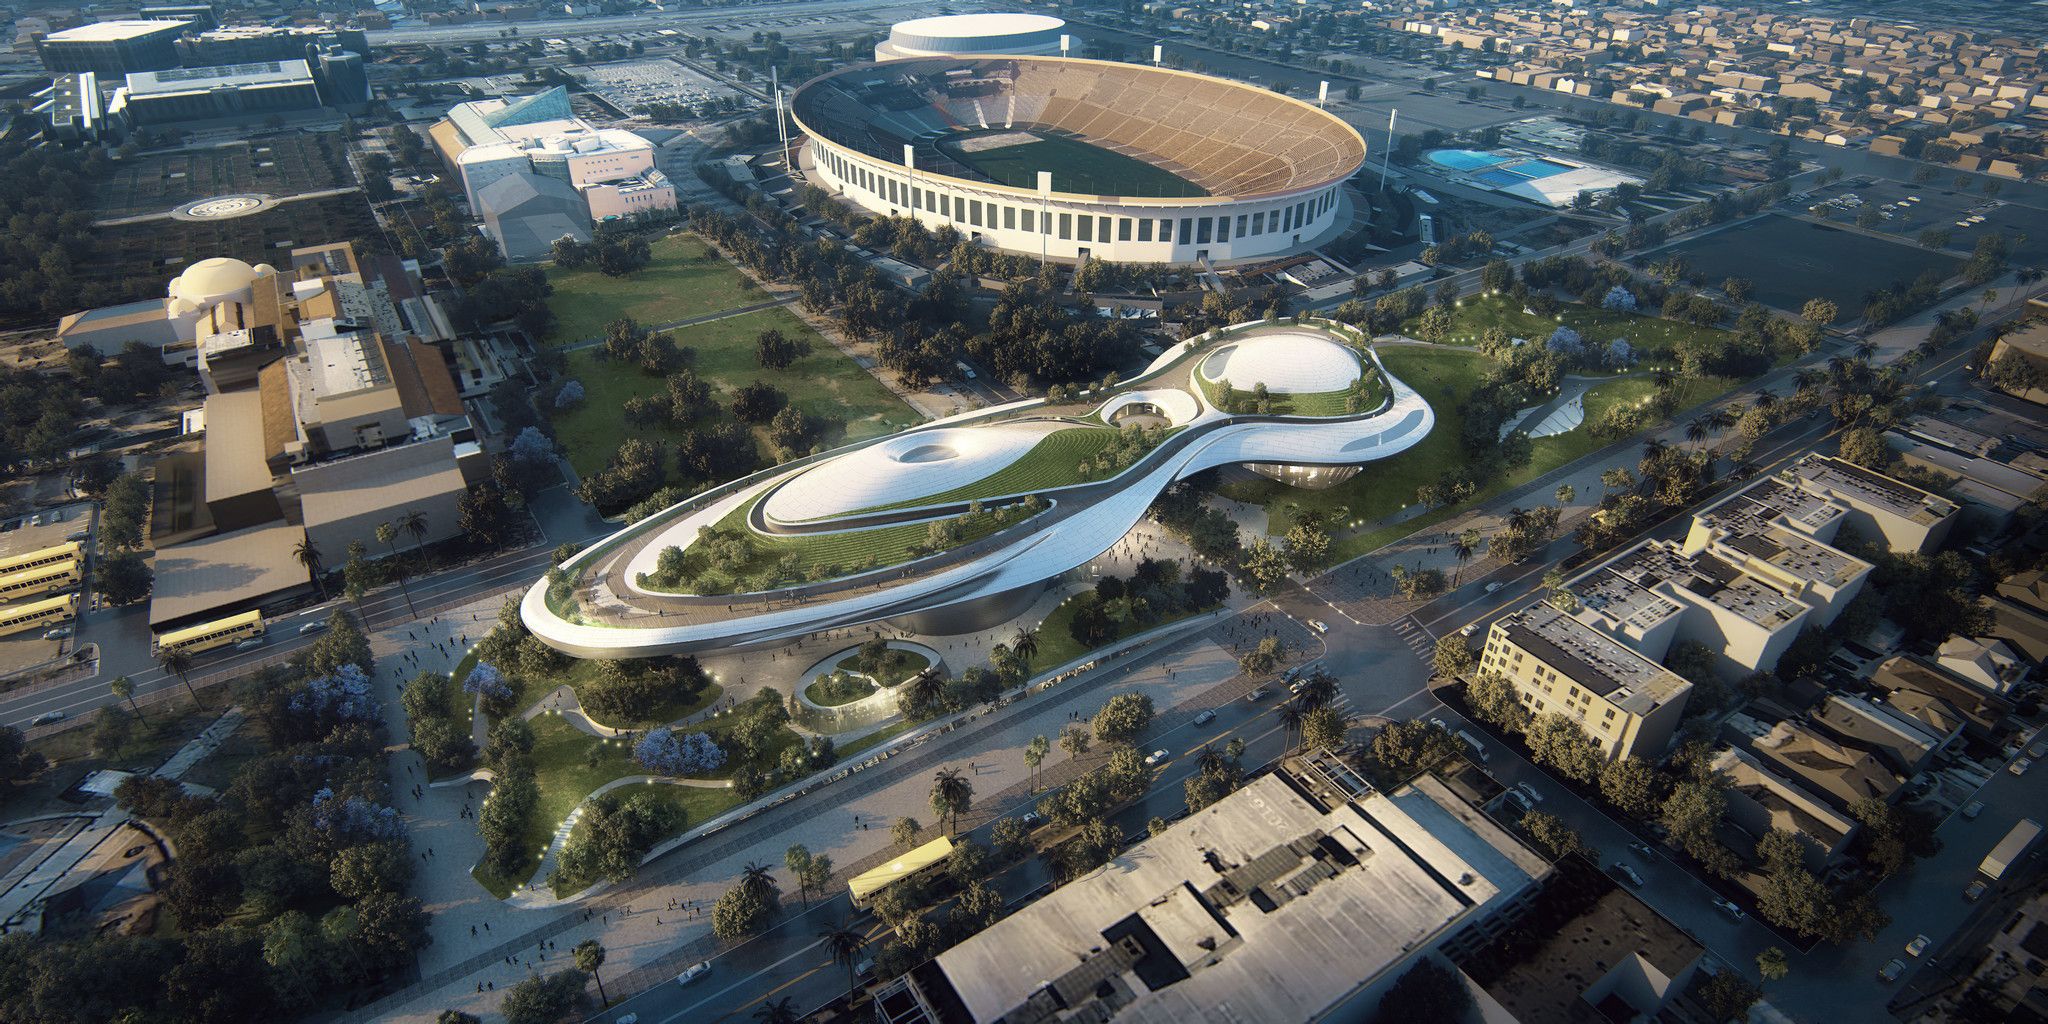 The Lucas Museum proposal for Exposition Park, with the Coliseum lying beyond it, as provided by the LA Times.